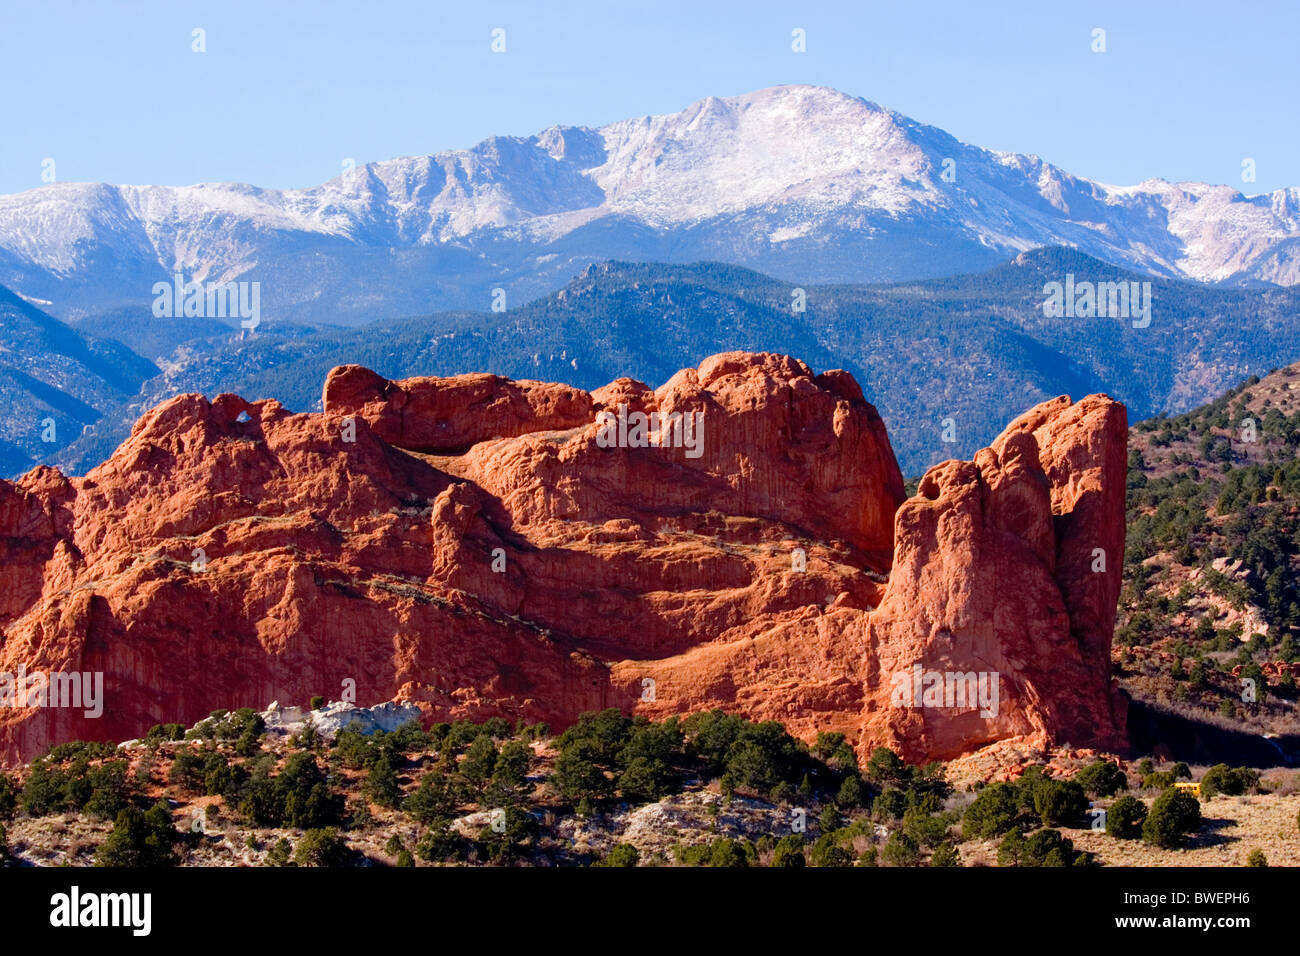 Garden Of The Gods Park And Pikes Peak Stock Photo 32901826 Alamy